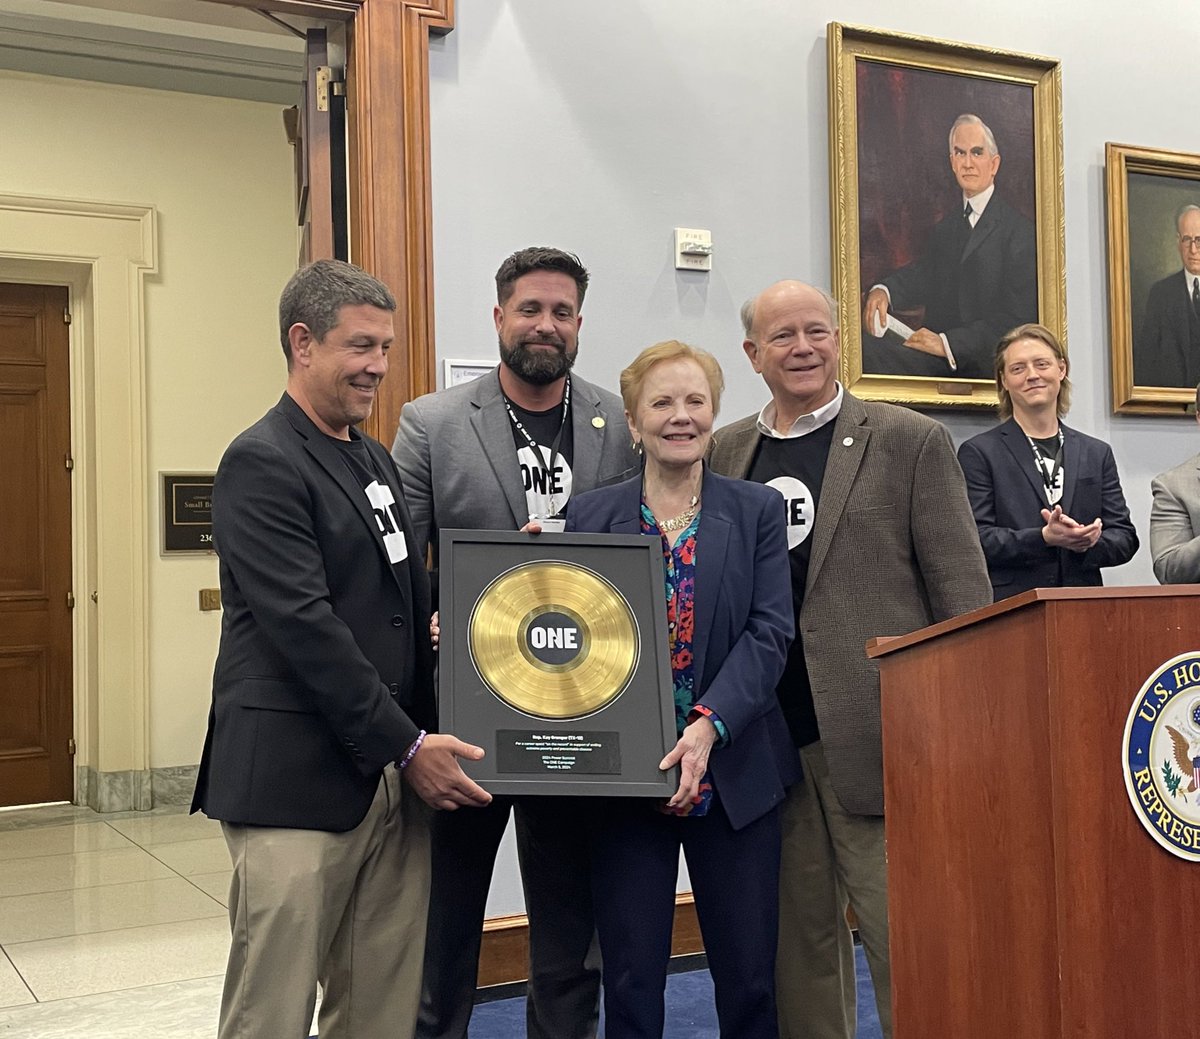 We’re so lucky to be joined tonight by Chairwoman @RepKayGranger! Our Texas activists presented her with a commemorative gold record in honor of a career spent “on the record” in support of the fight to end extreme poverty and preventable disease. #ONEPowerSummit